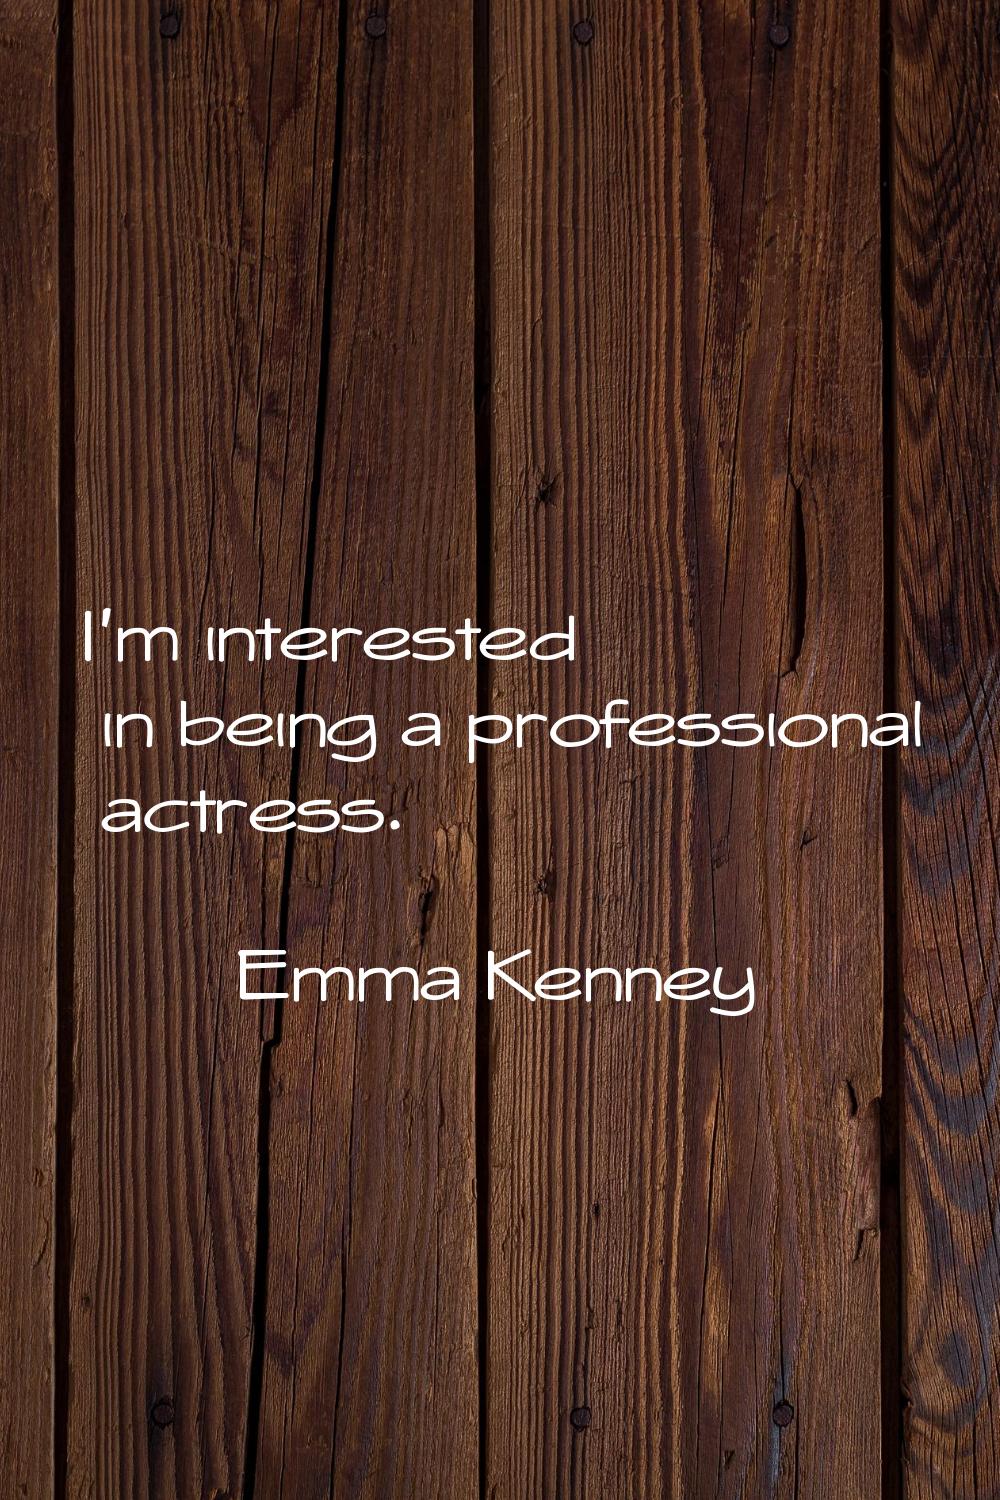 I'm interested in being a professional actress.